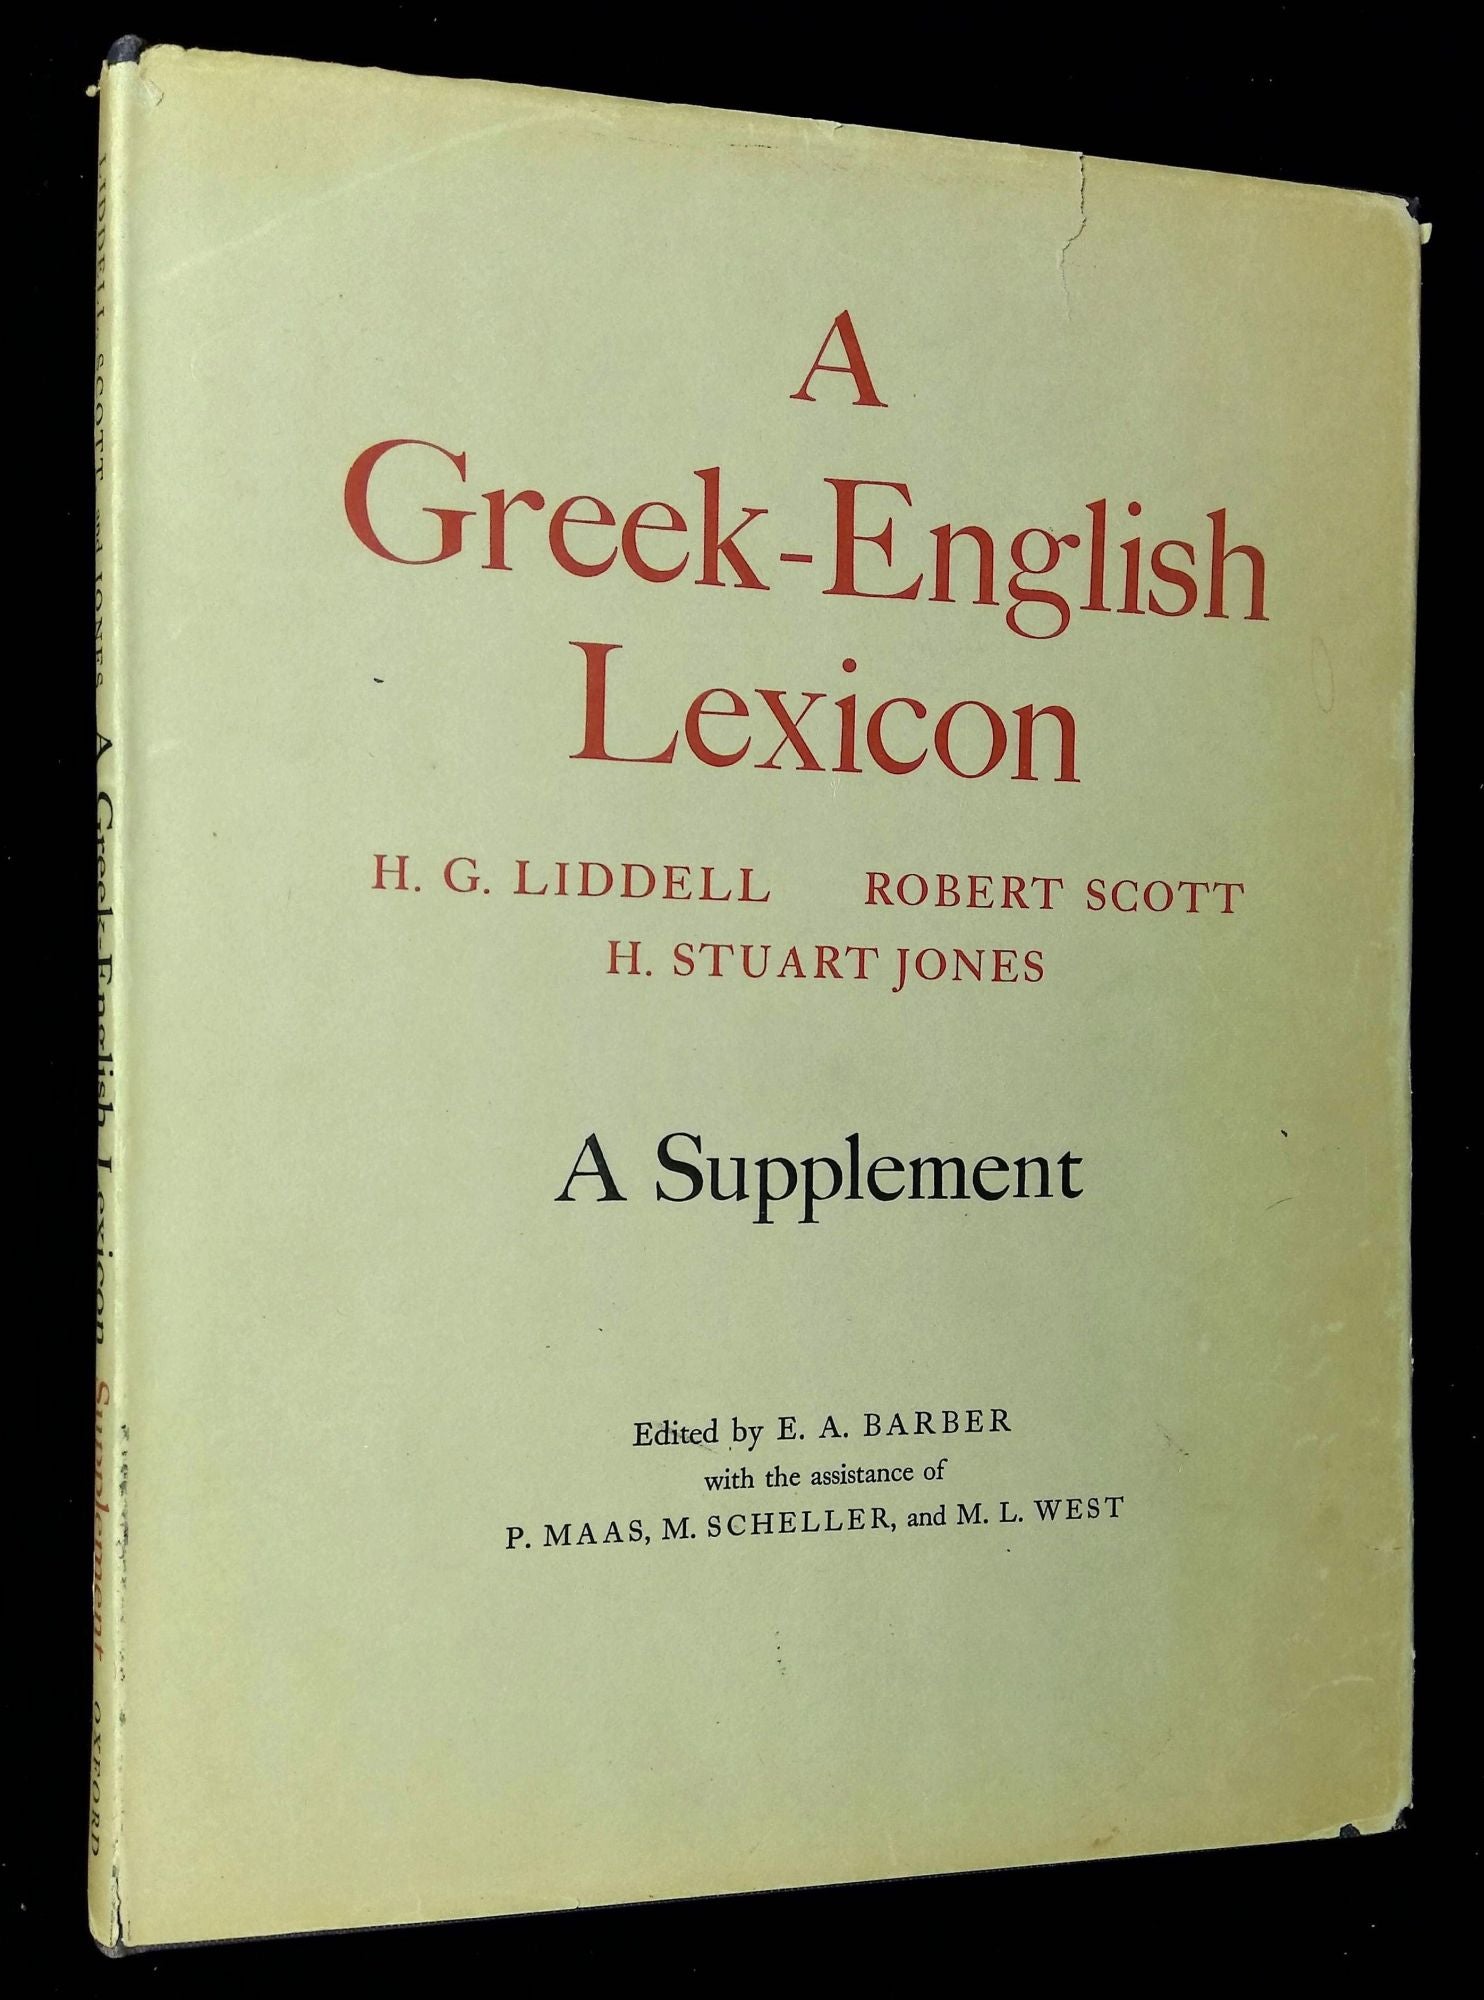 Greek-English Lexicon: A Supplement by H. G. Liddell, Robert Scott, P. Maas  E. on Common Crow Books